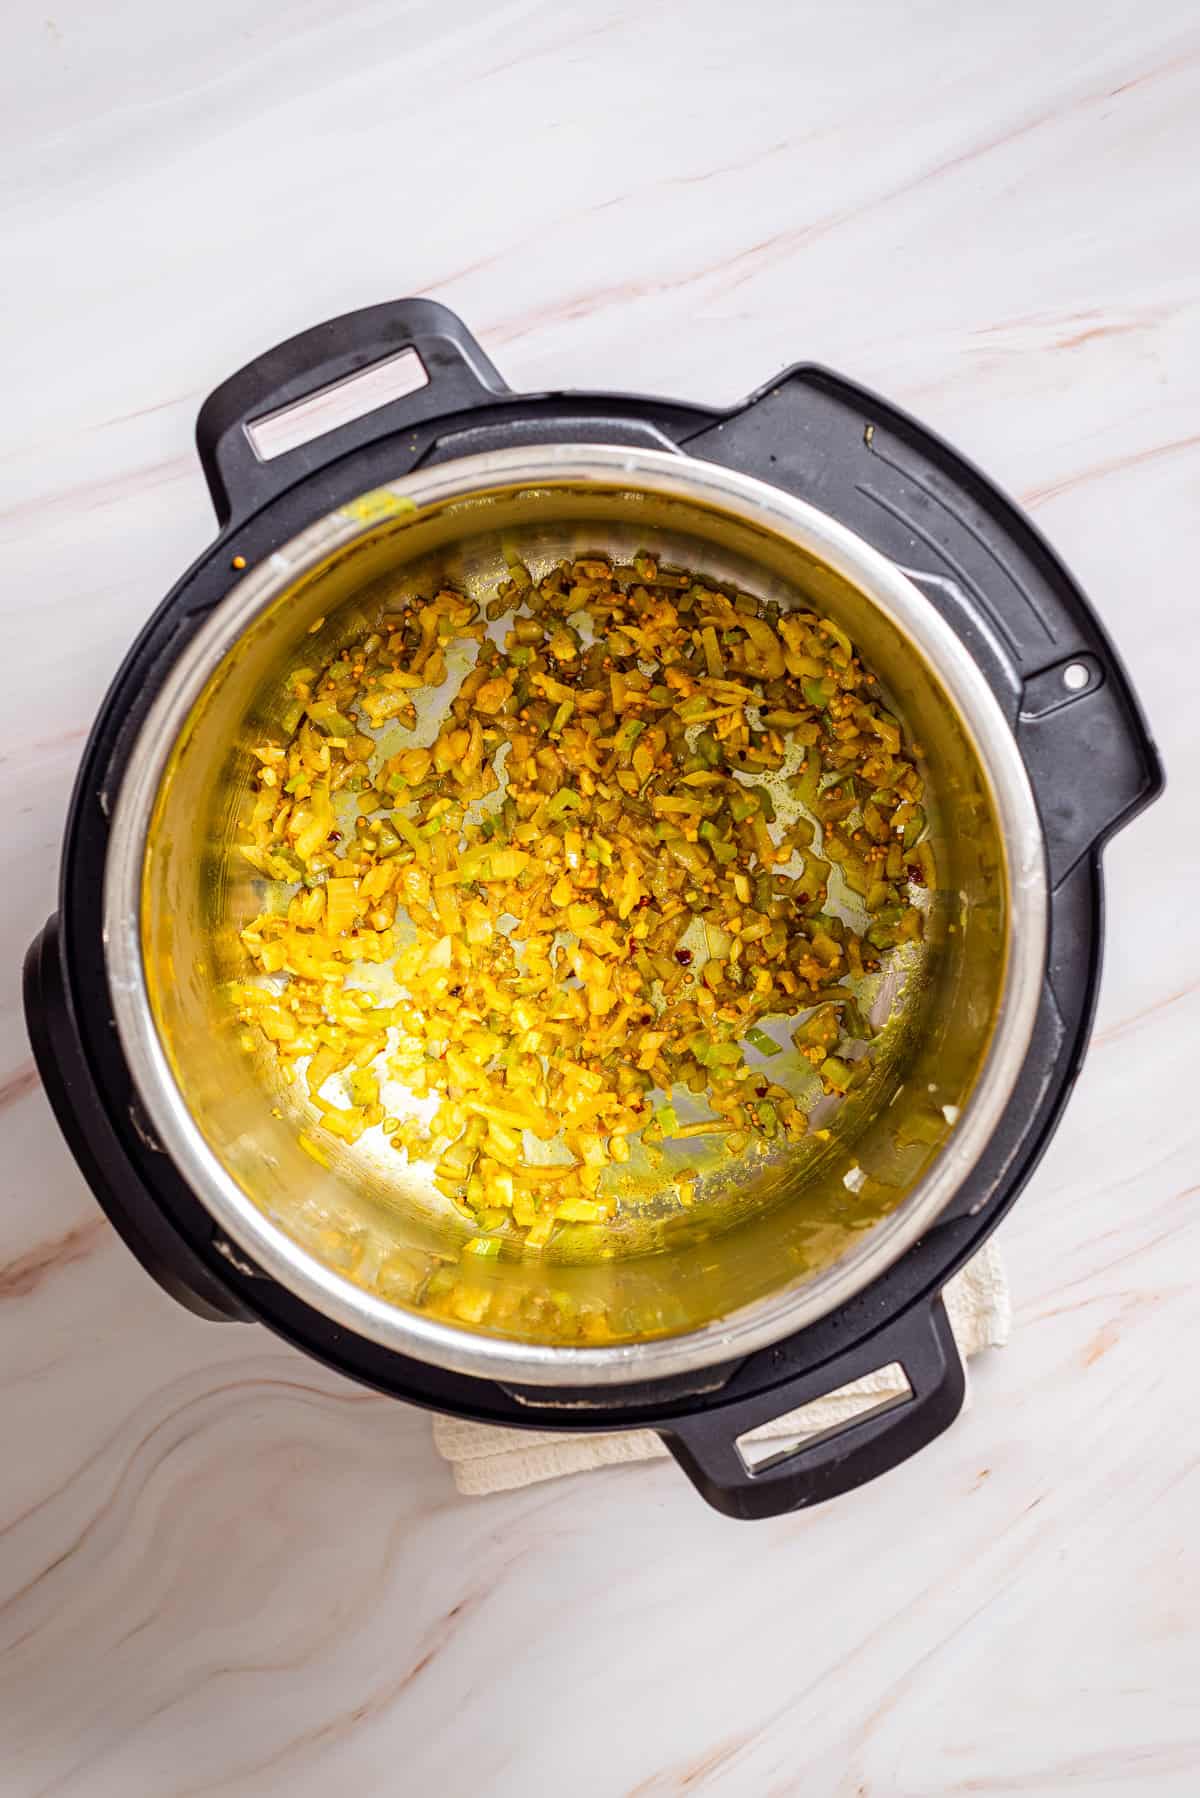 Overhead view of mixed celery, onion, garlic, and ginger added with mustard seeds, turmeric, curry powder, red pepper flakes, and ground cumin inside an instant pot.